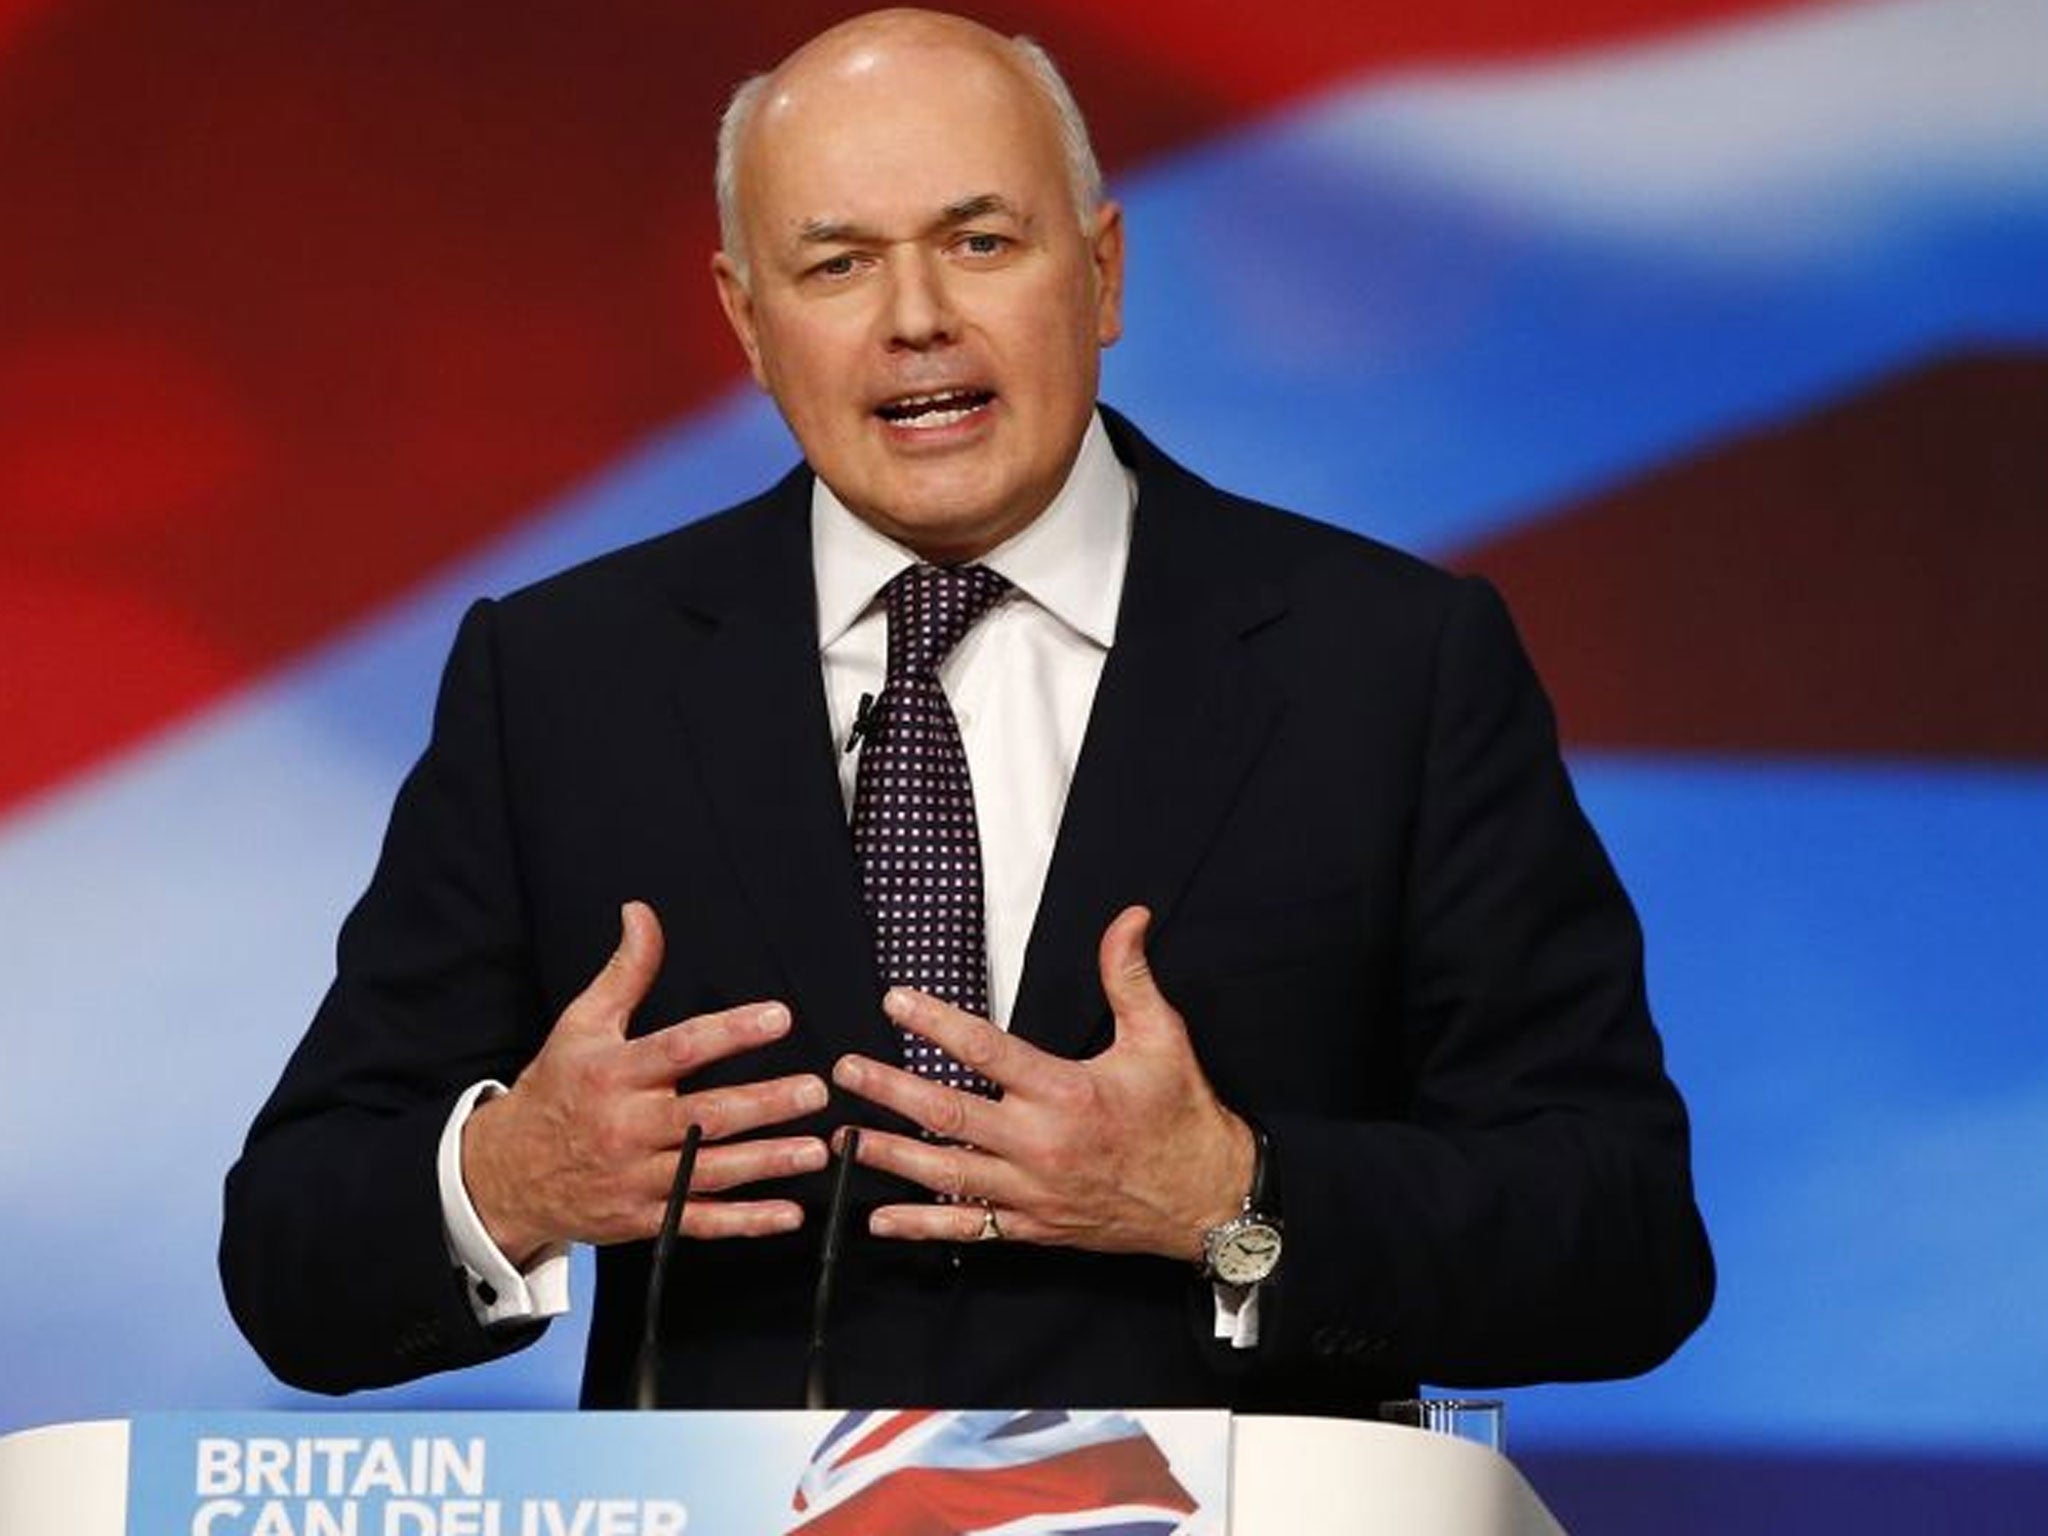 The work and pensions secretary Iain Duncan Smith said he wanted to see EU migrants wait up to two years before receiving benefits